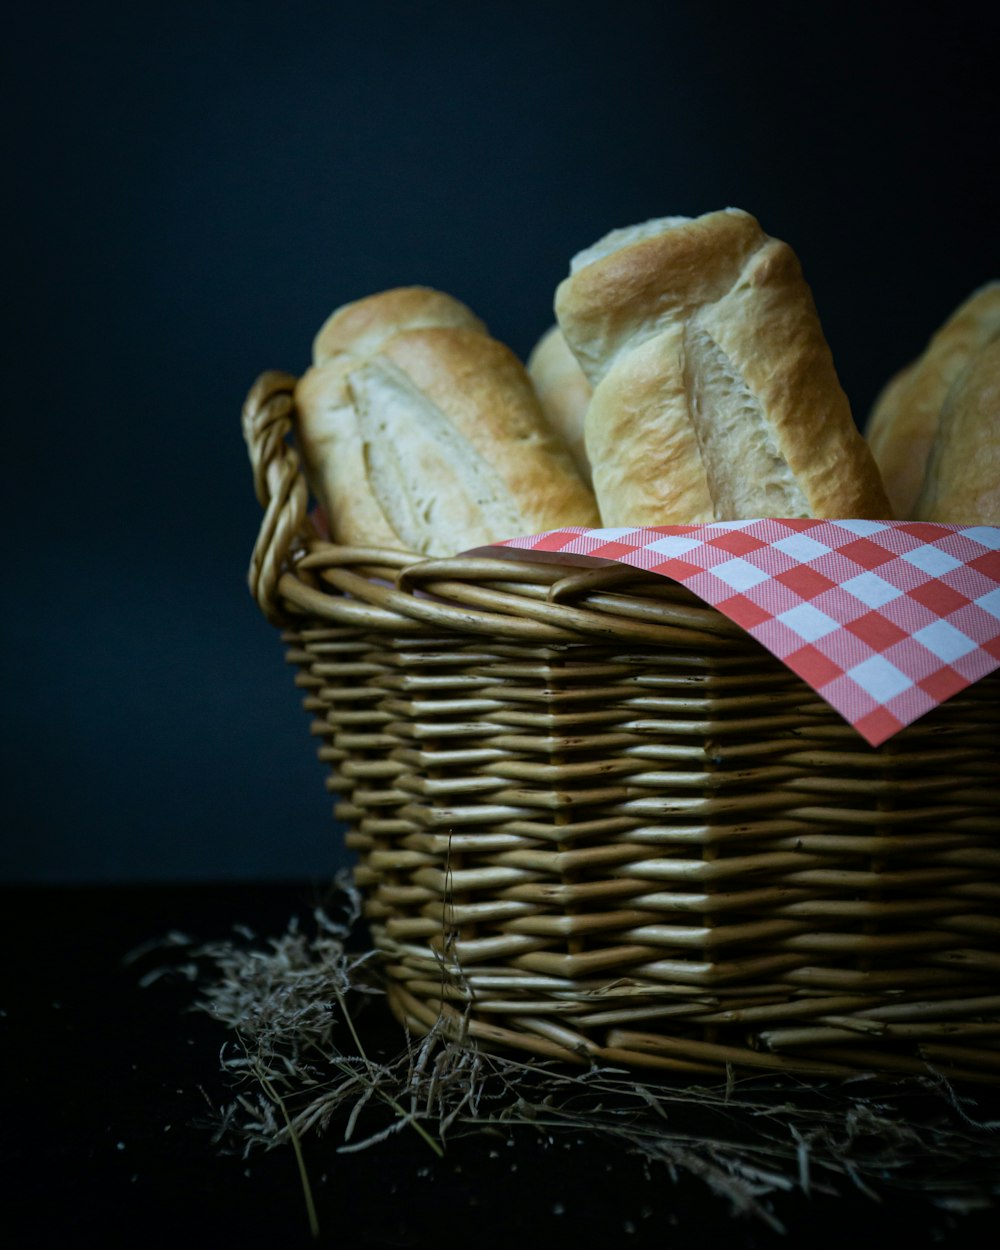 bread on brown woven basket